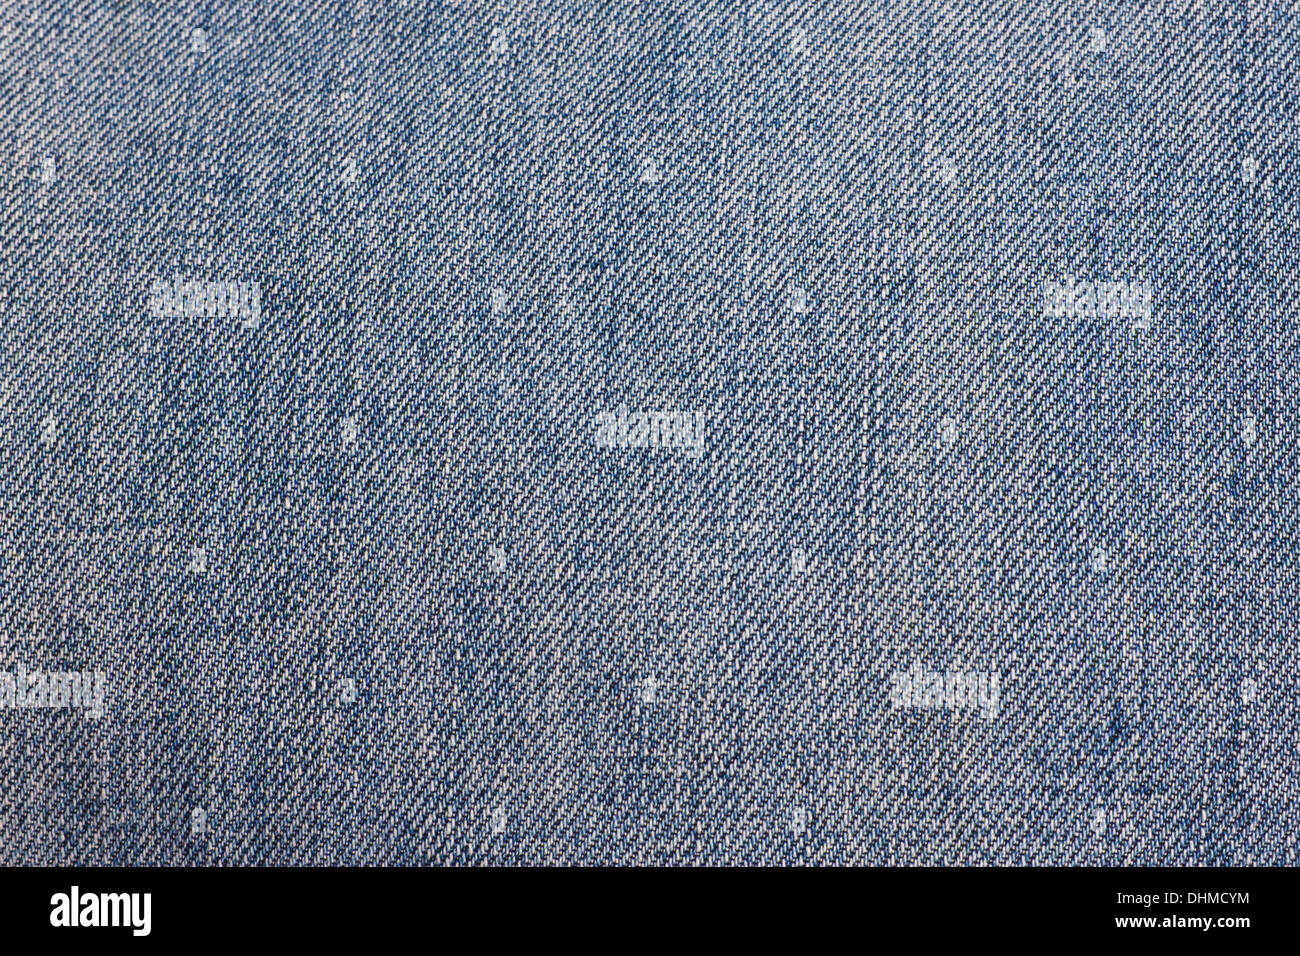 jeans background Stock Photo